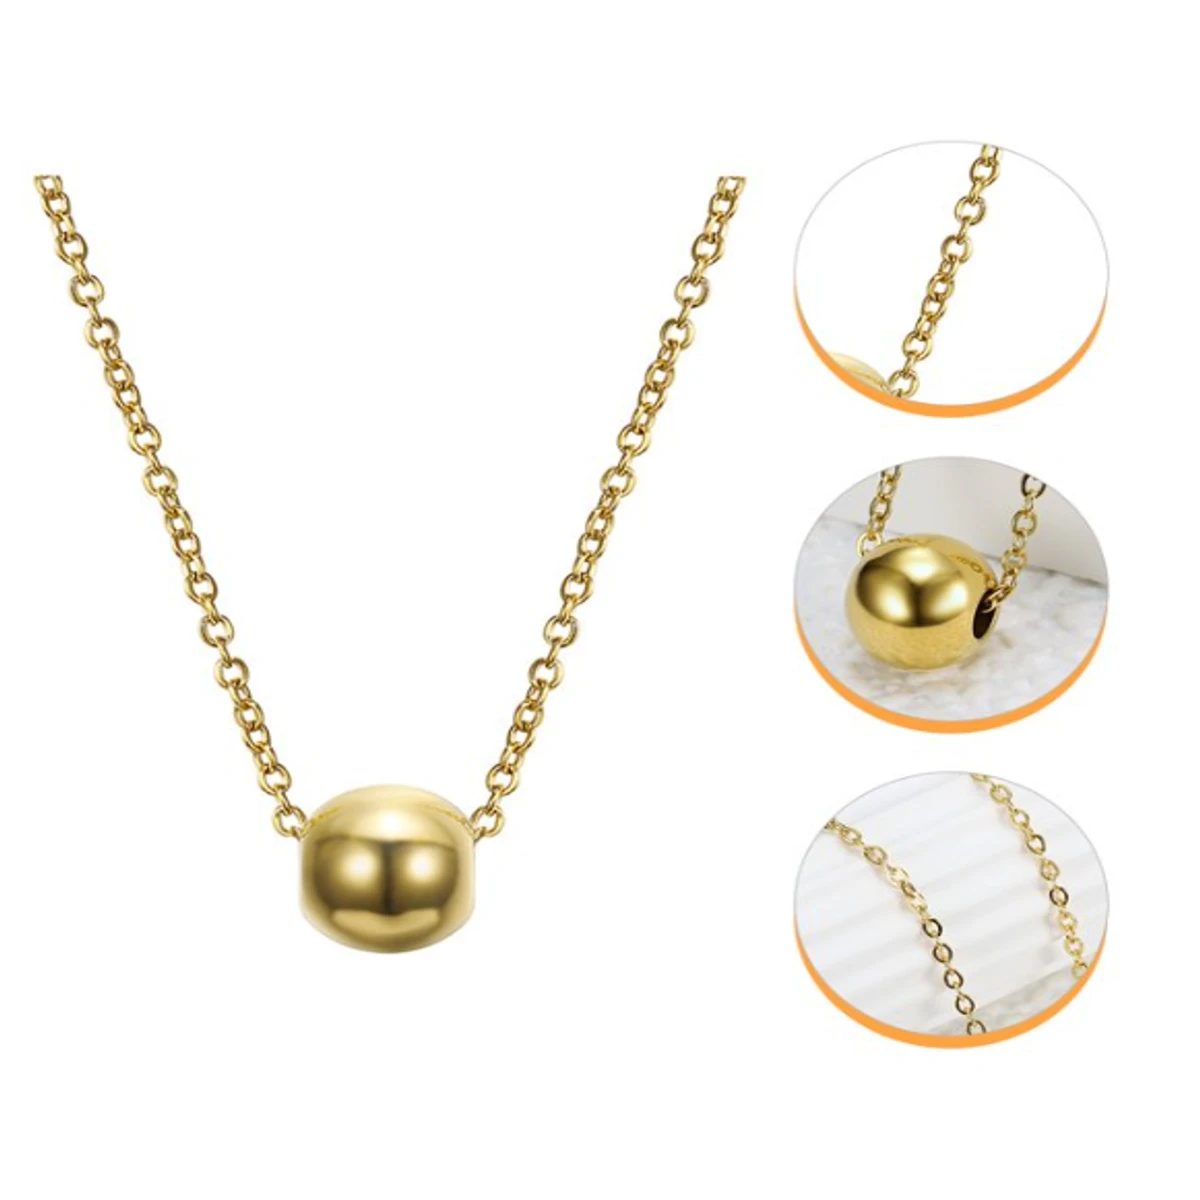 Fashion Sweet Pearl Ball Droplets Chain Pendant Necklace